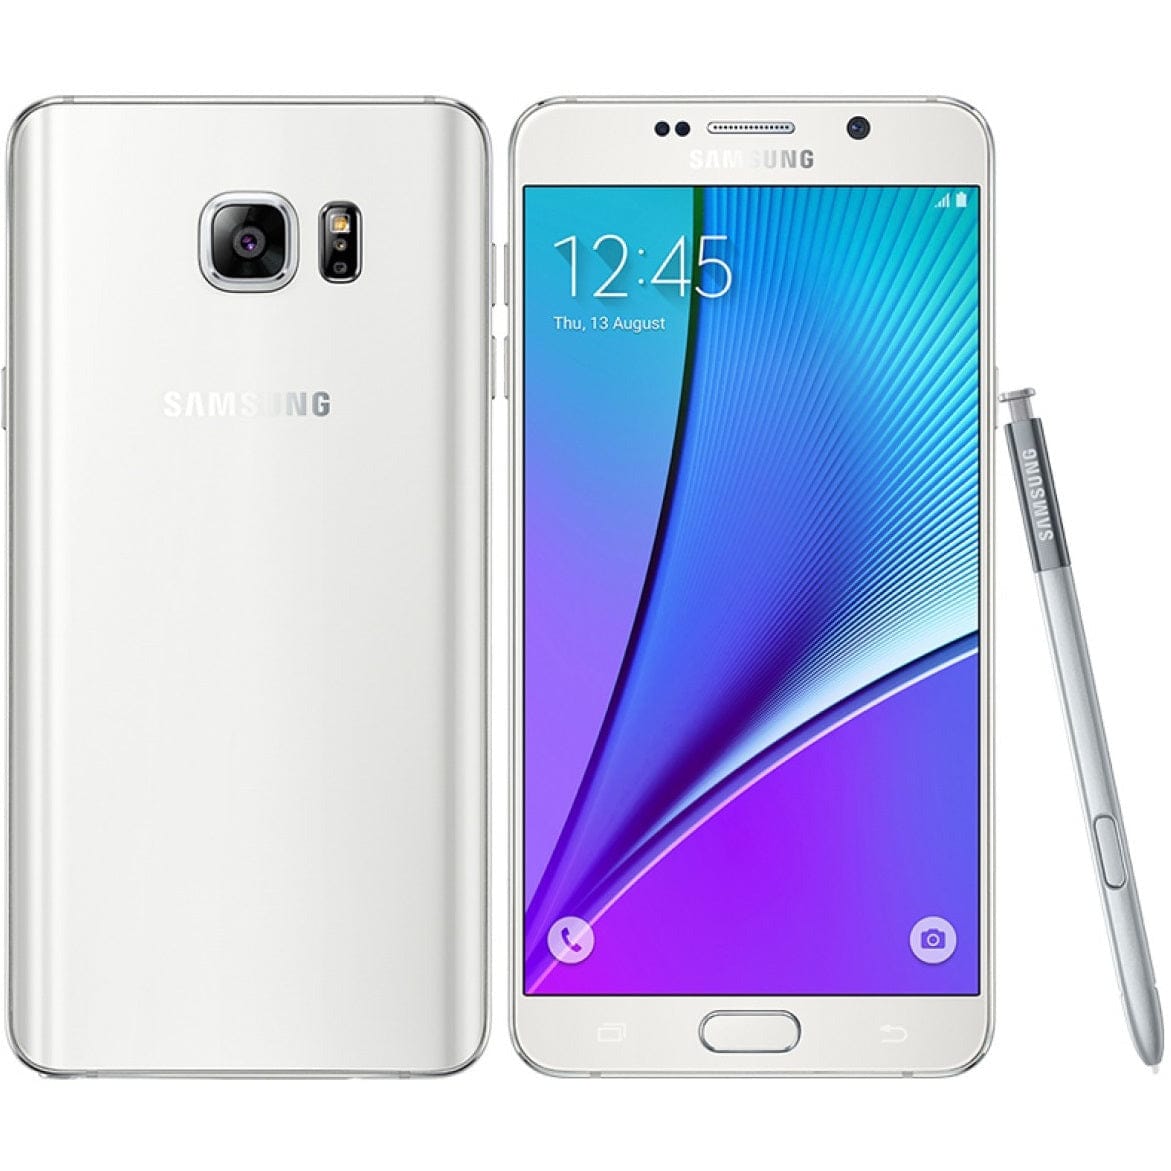 Samsung Galaxy Note5 SM-N920T - 32 GB - White Pearl T-Mobile